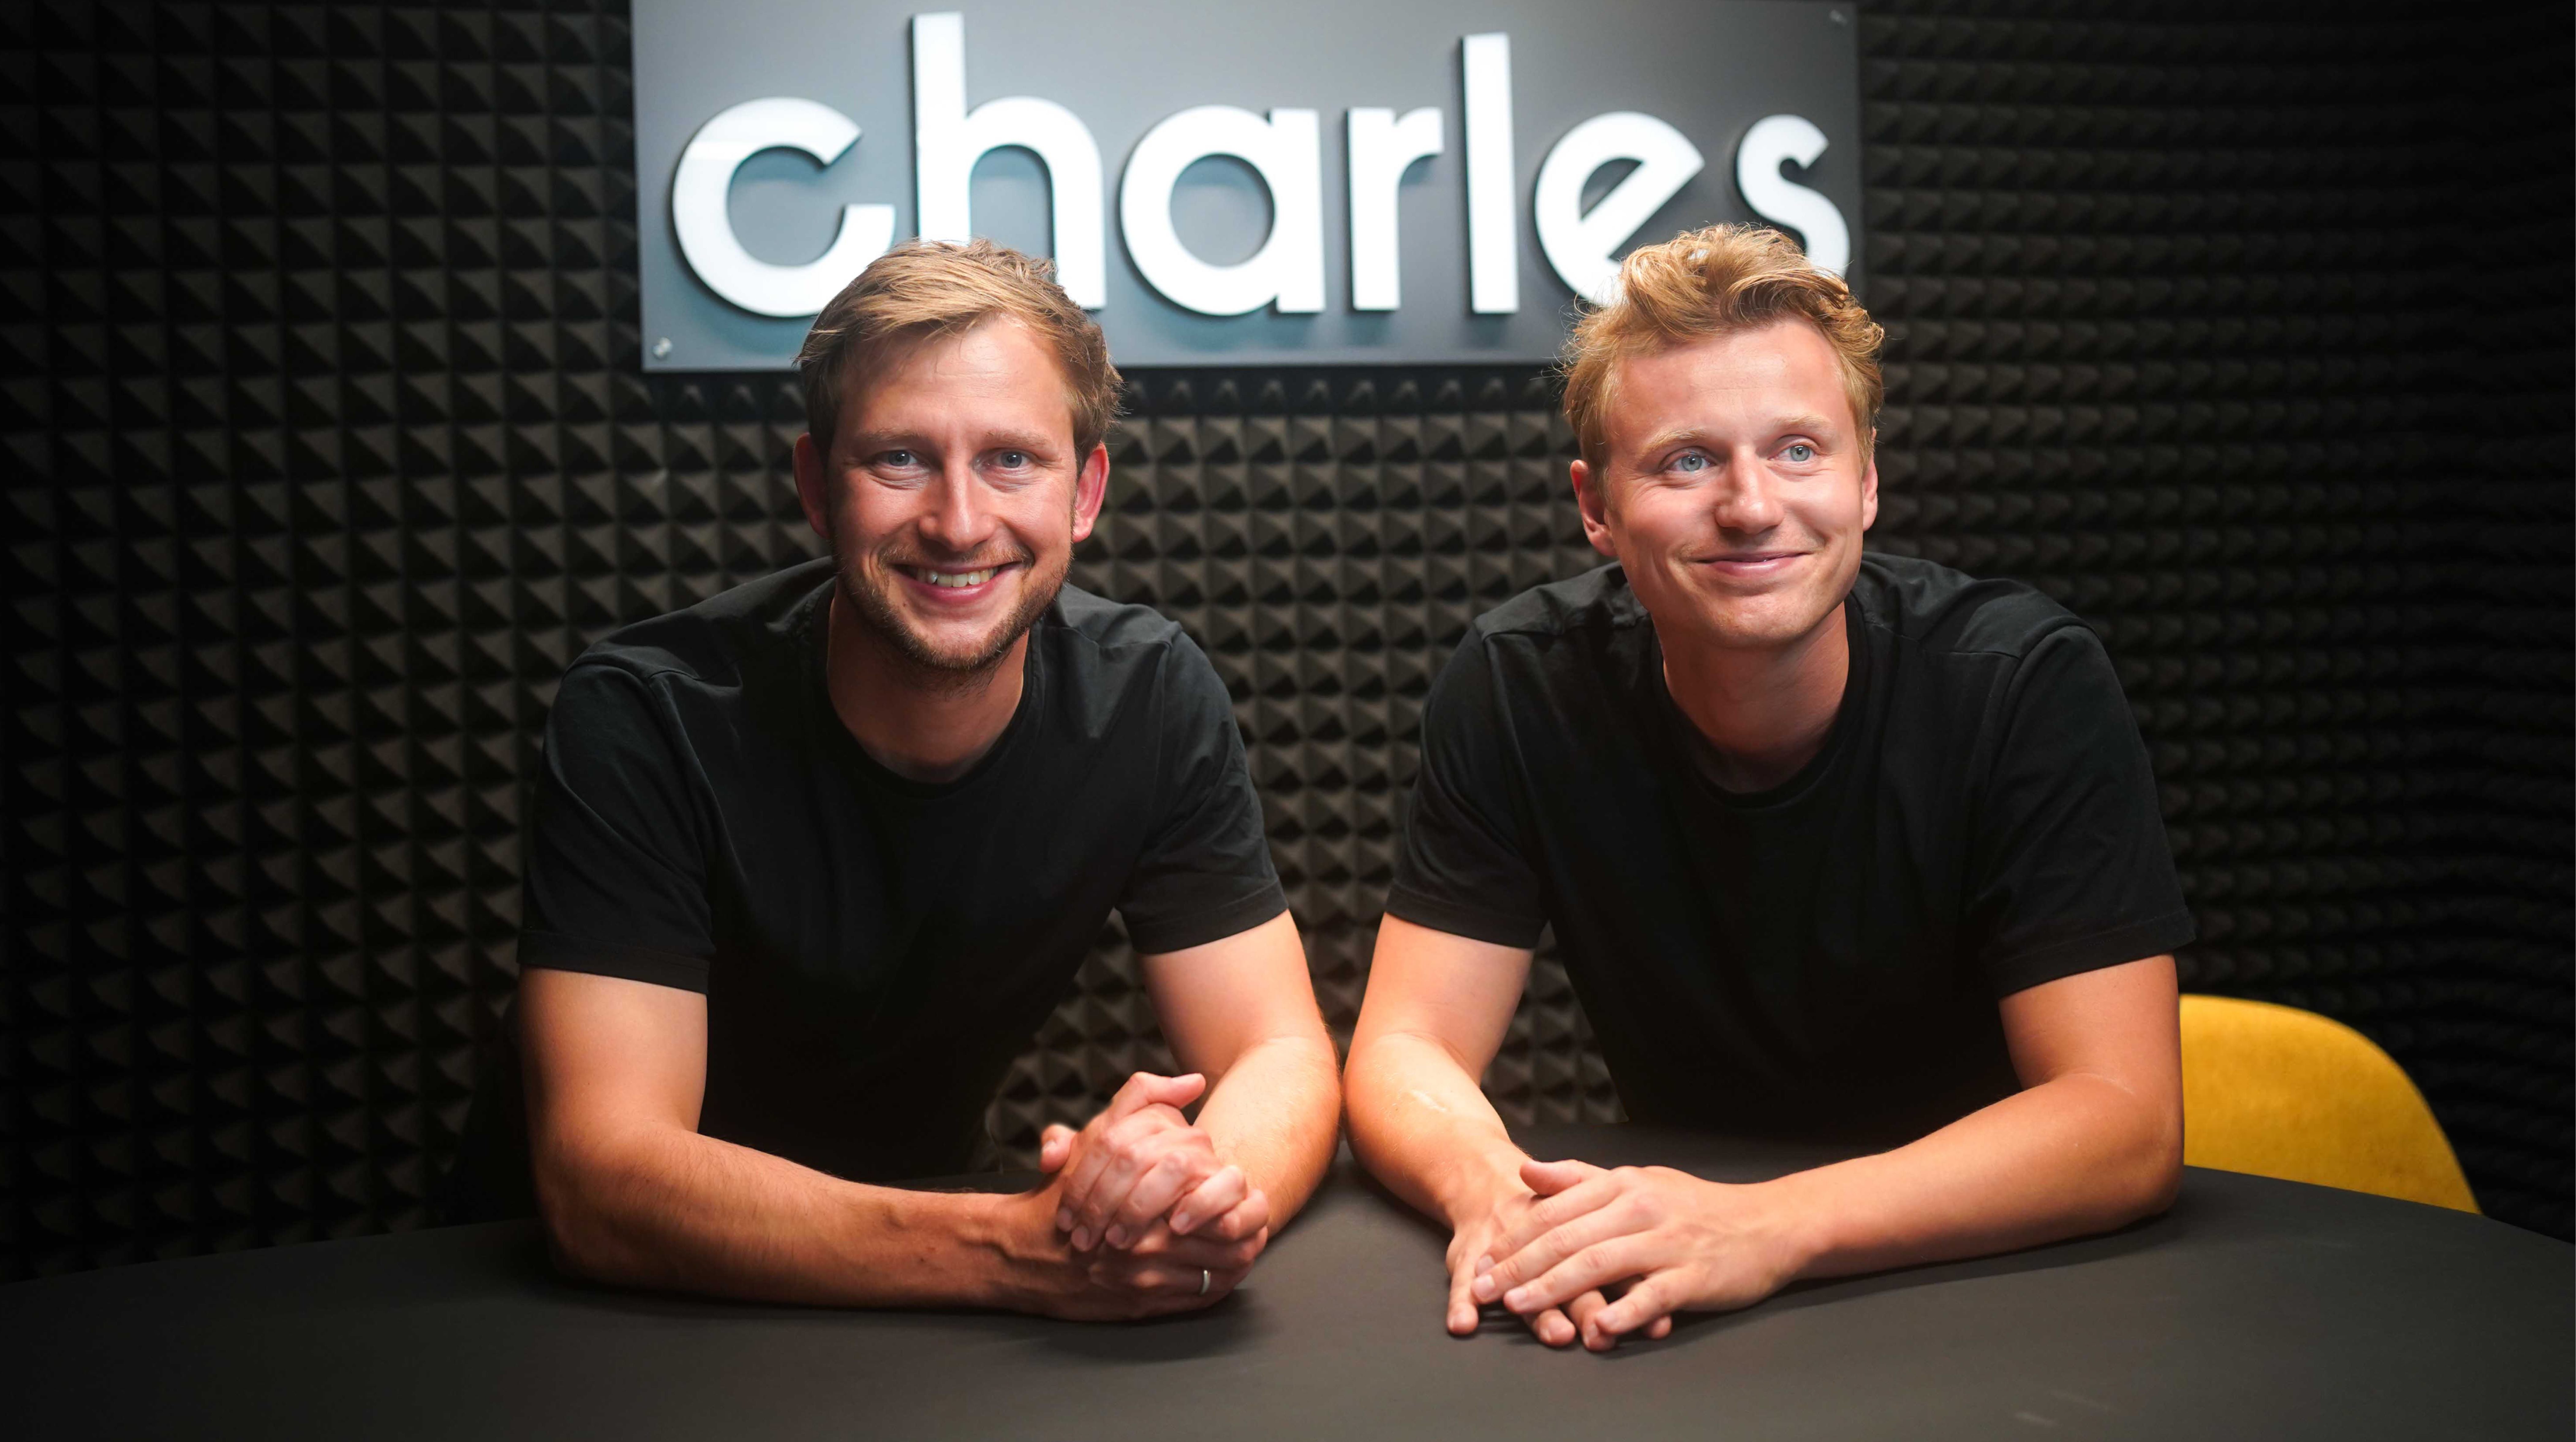 Addy and Andreas, co-founders of charles